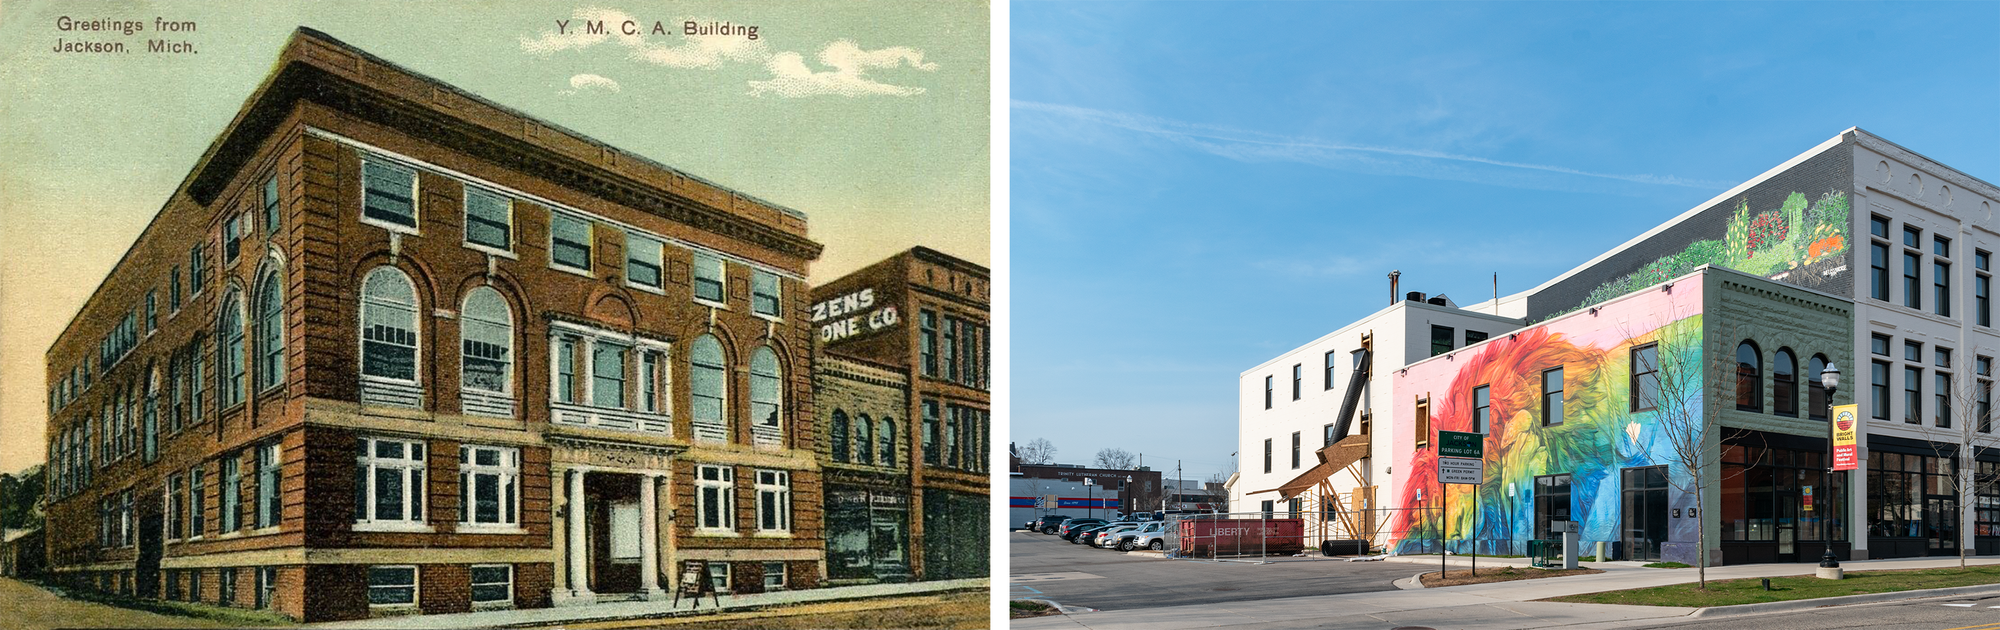 On the left, a postcard of the YMCA, the stone building, and the three story commercial building, with text "Greetings from Jackson, Mich.". On the right, the stone building and the three story building remain, rainbow lion painted on the side of the stone building, a parking lot and a dumpster.  